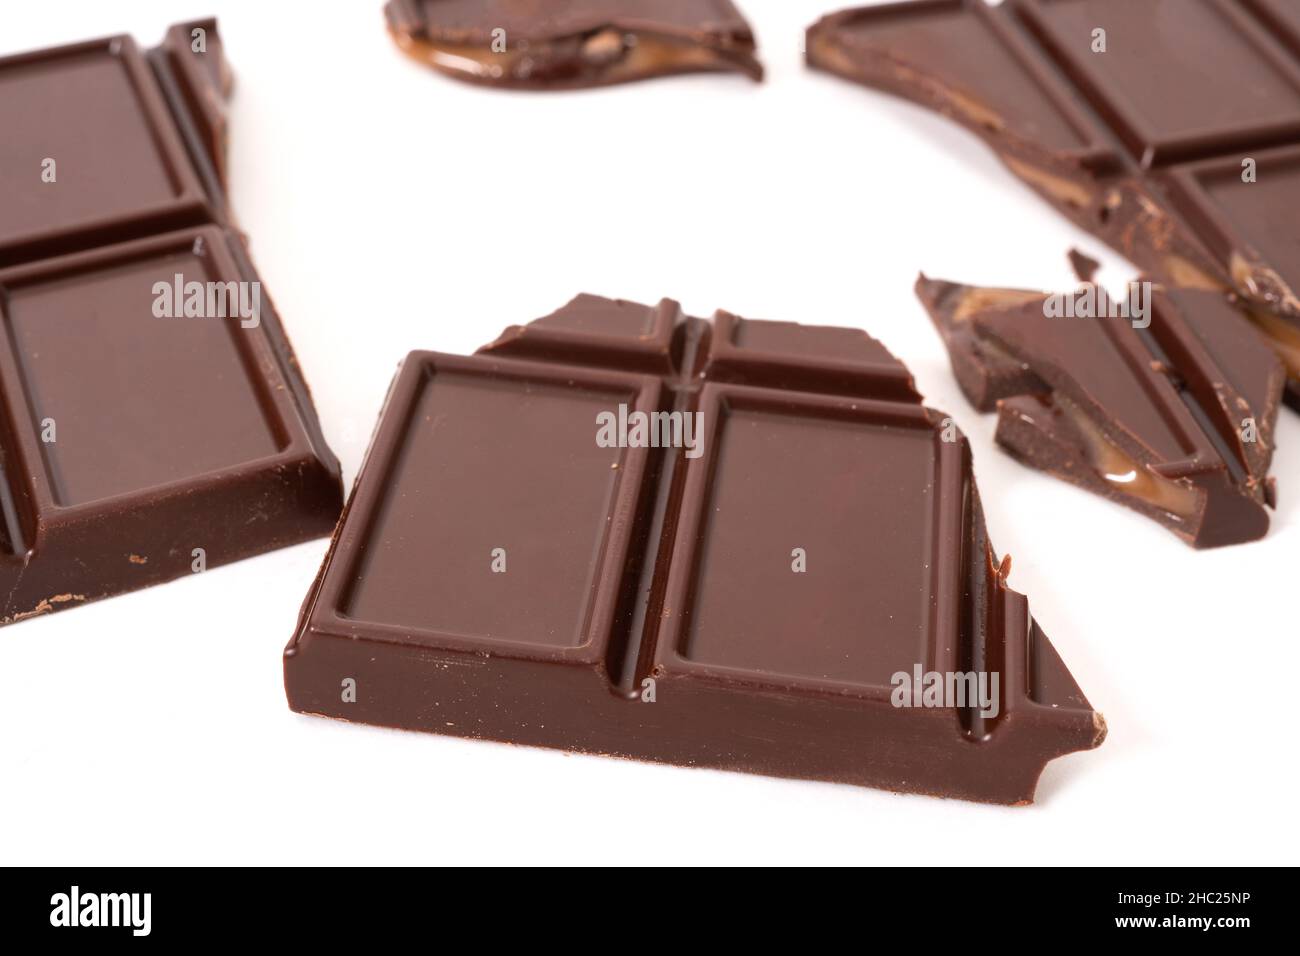 Dark chocolate bar and cubes with cream filling inside. Selective focus Stock Photo